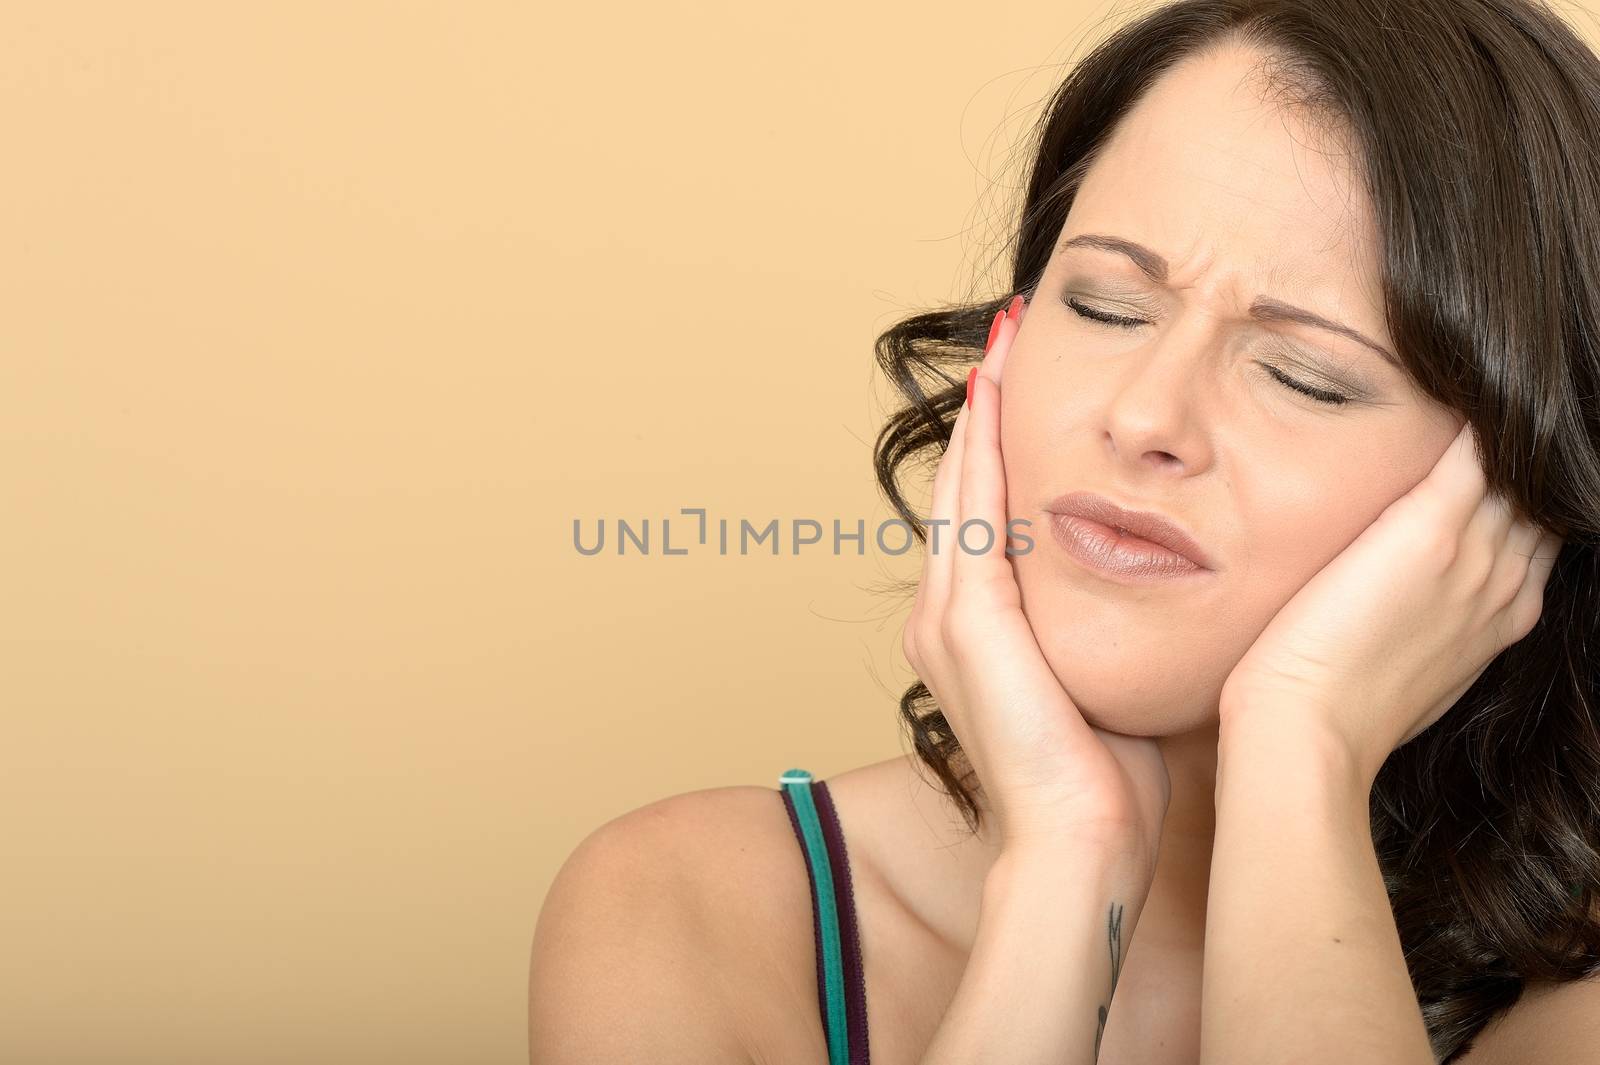 Attractive Young Woman With a Painful Toothache by Whiteboxmedia